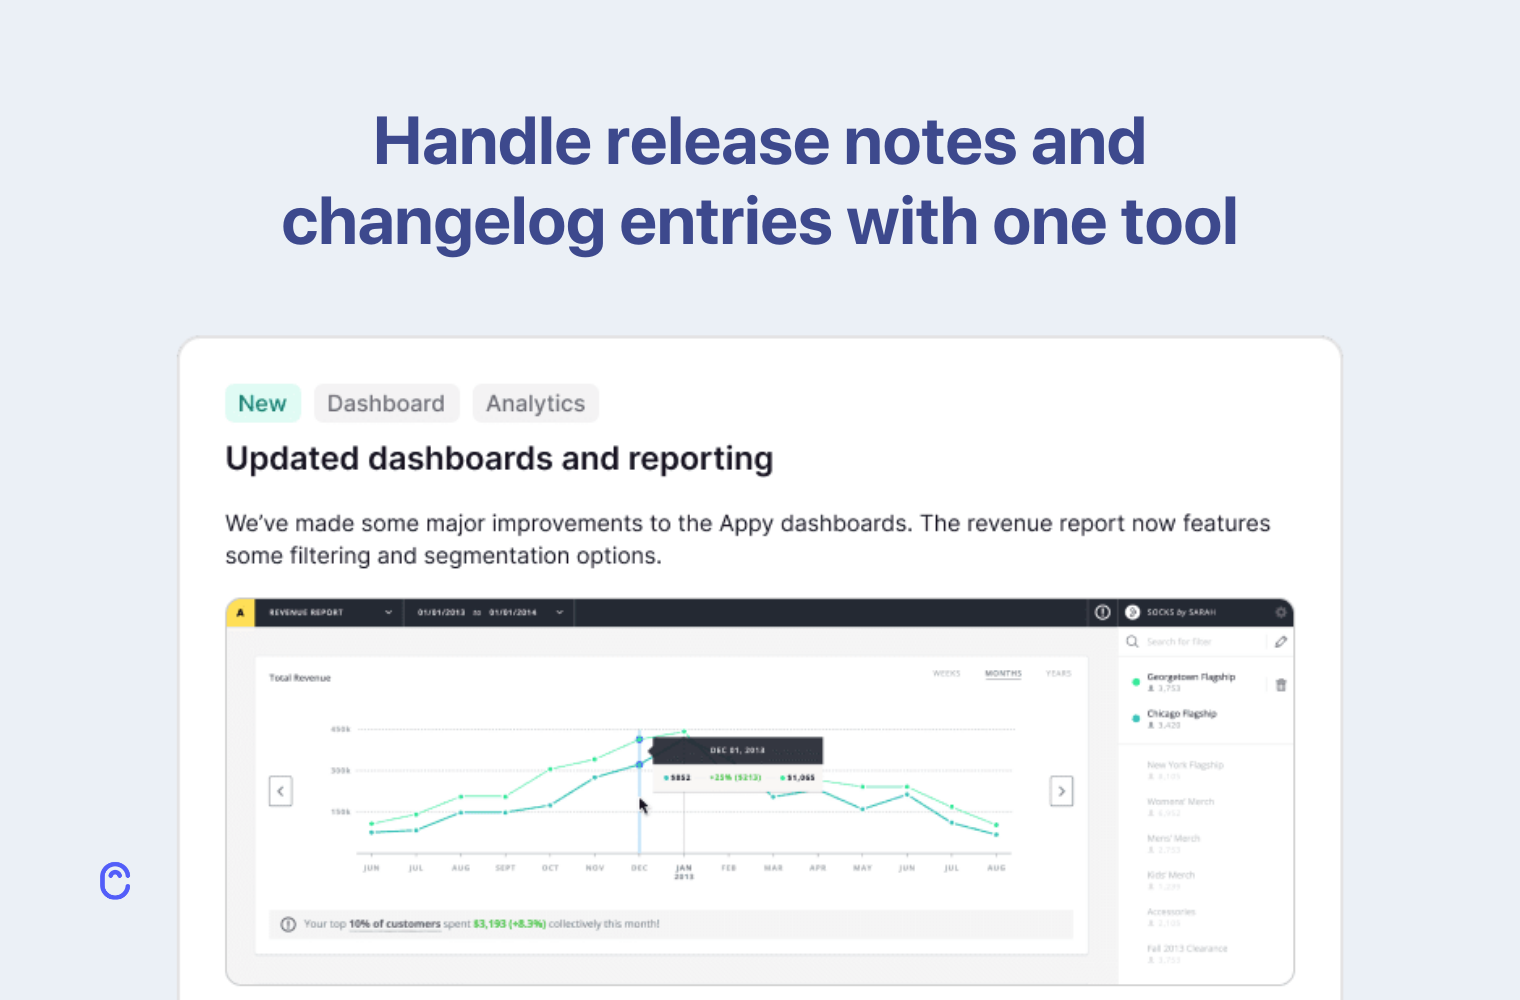 Handle release notes and changelog entries with one tool.